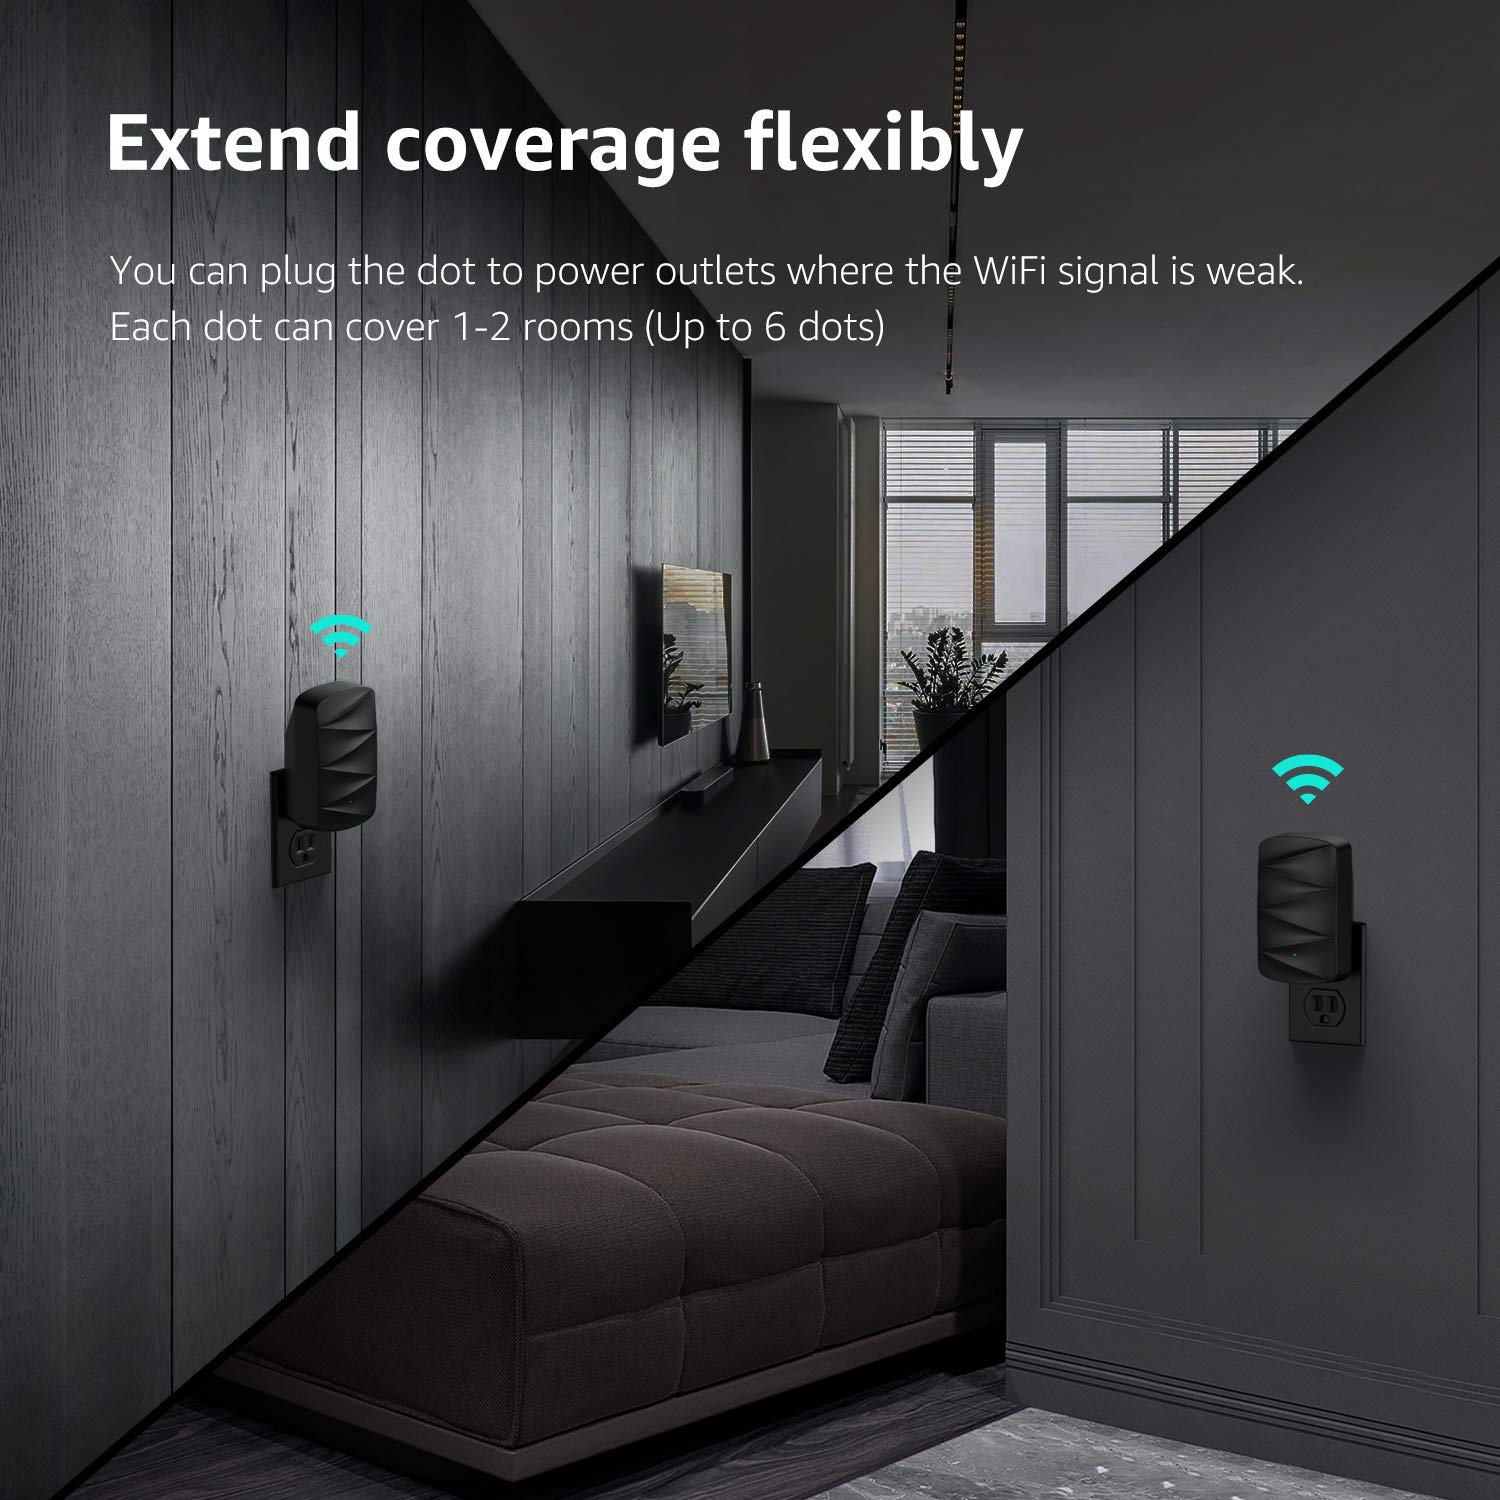 Meshforce M3 Dot Wall Plug WiFi Extender (Midnight Black), Up to 1,000 Sq. ft. Coverage – Use with only MeshForce WiFi System